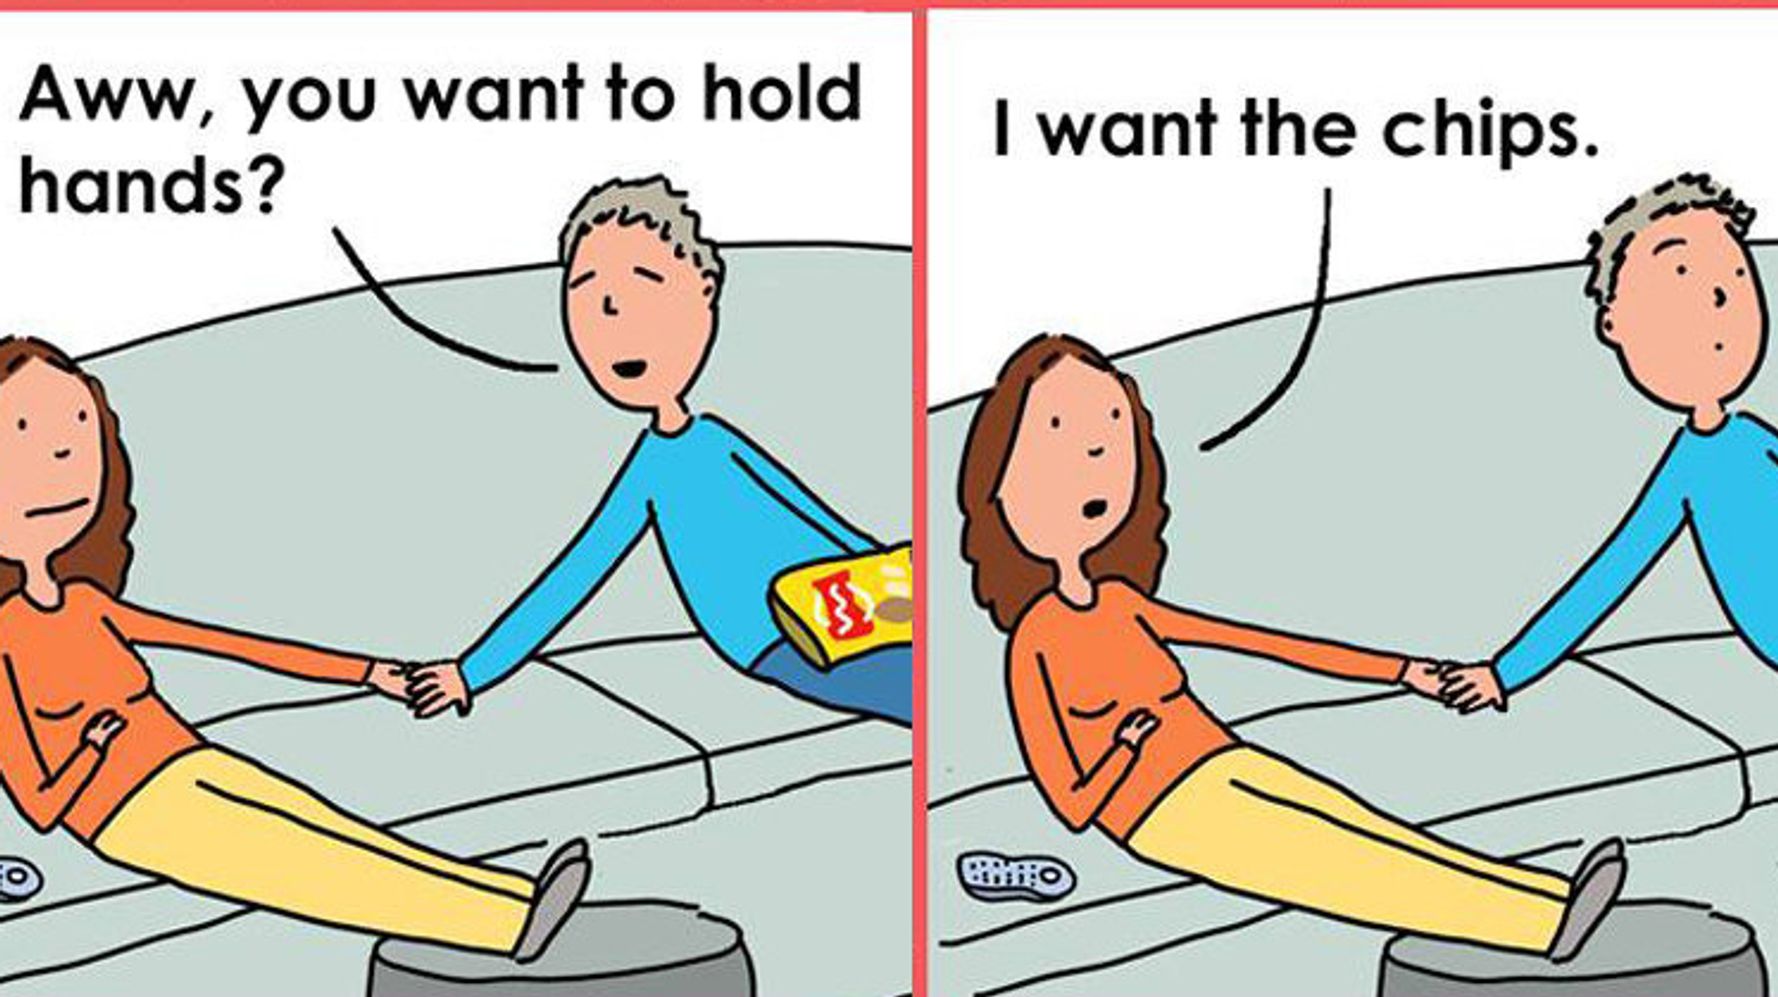 Wife's Comics About Married Life Are Just So Darn Relatable | HuffPost Life